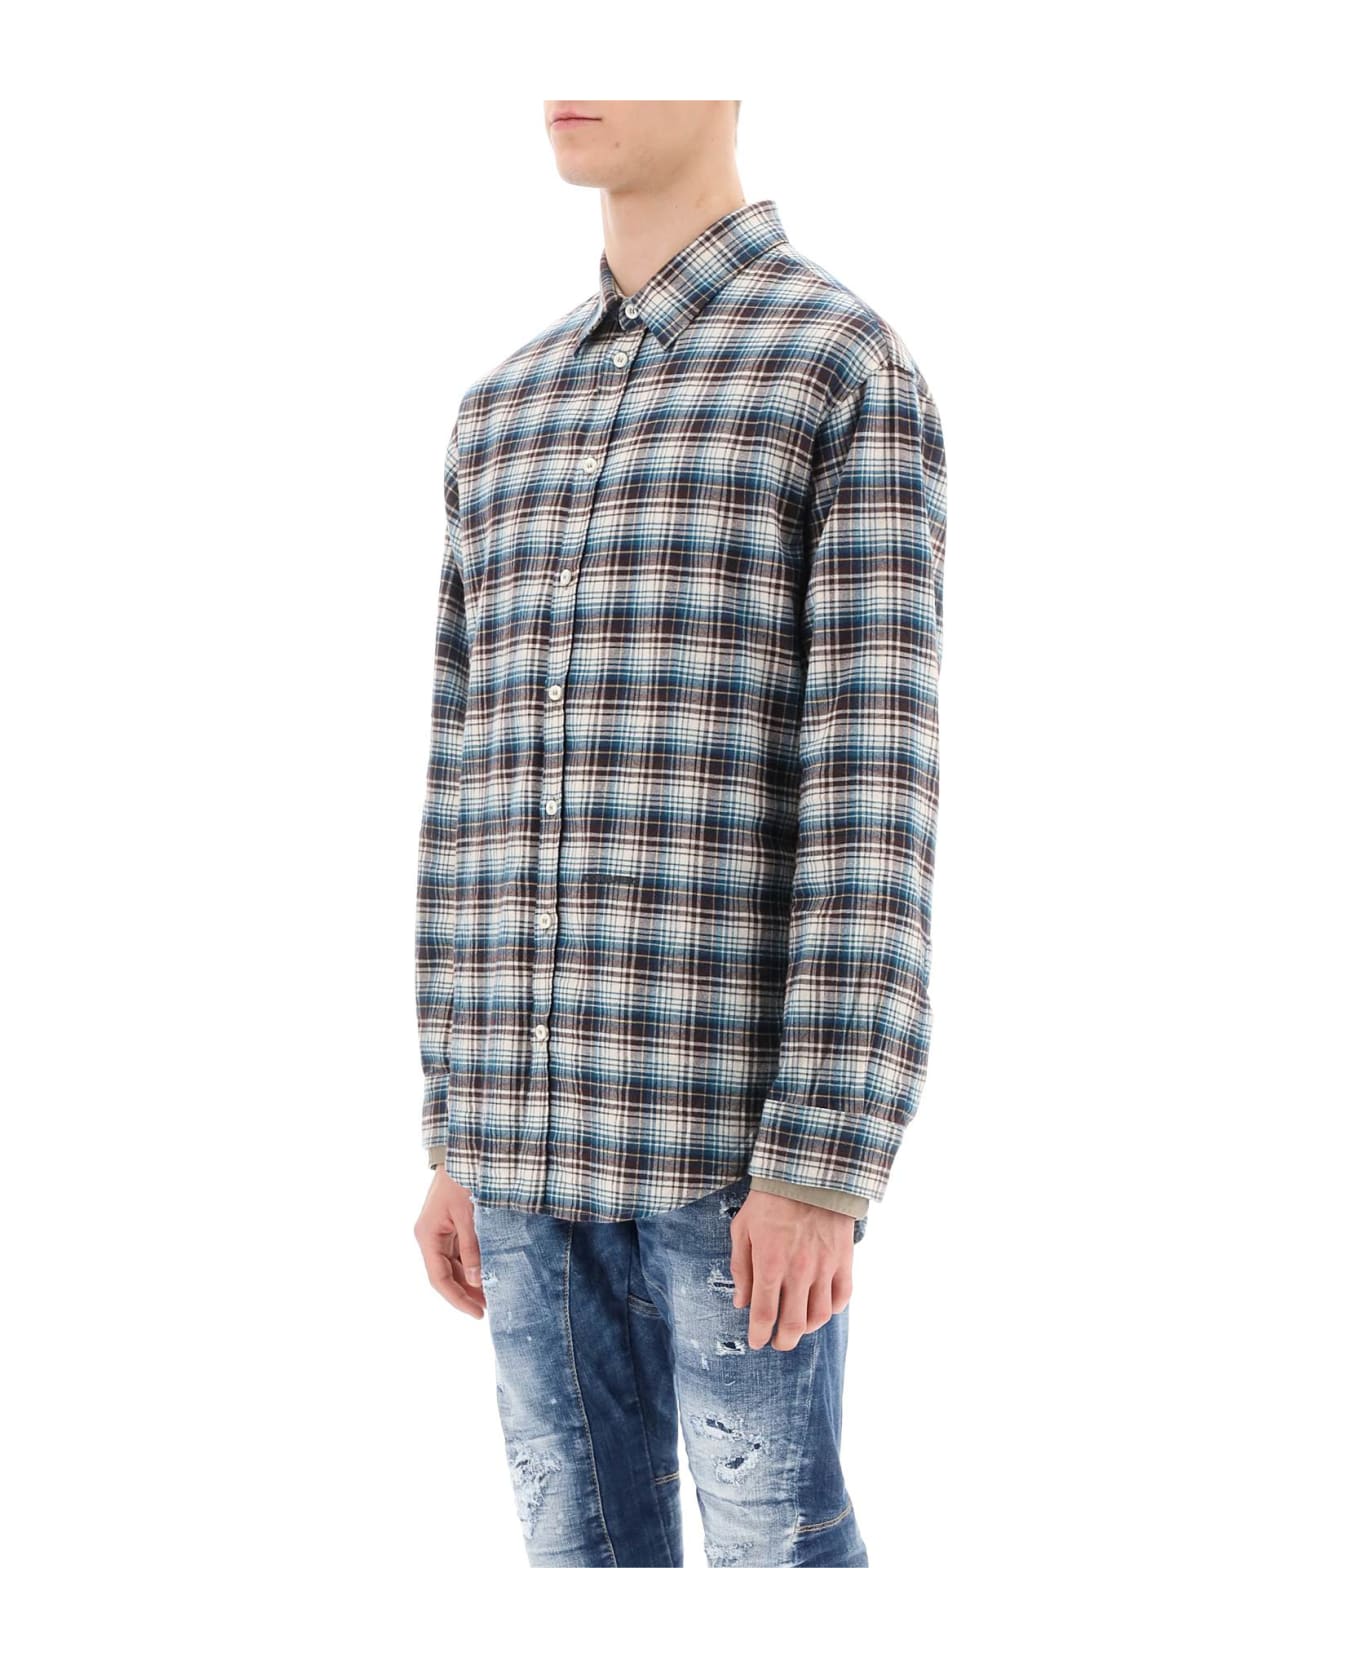 Dsquared2 Check Shirt With Layered Sleeves - IVORY BROWN GREEN (Blue)